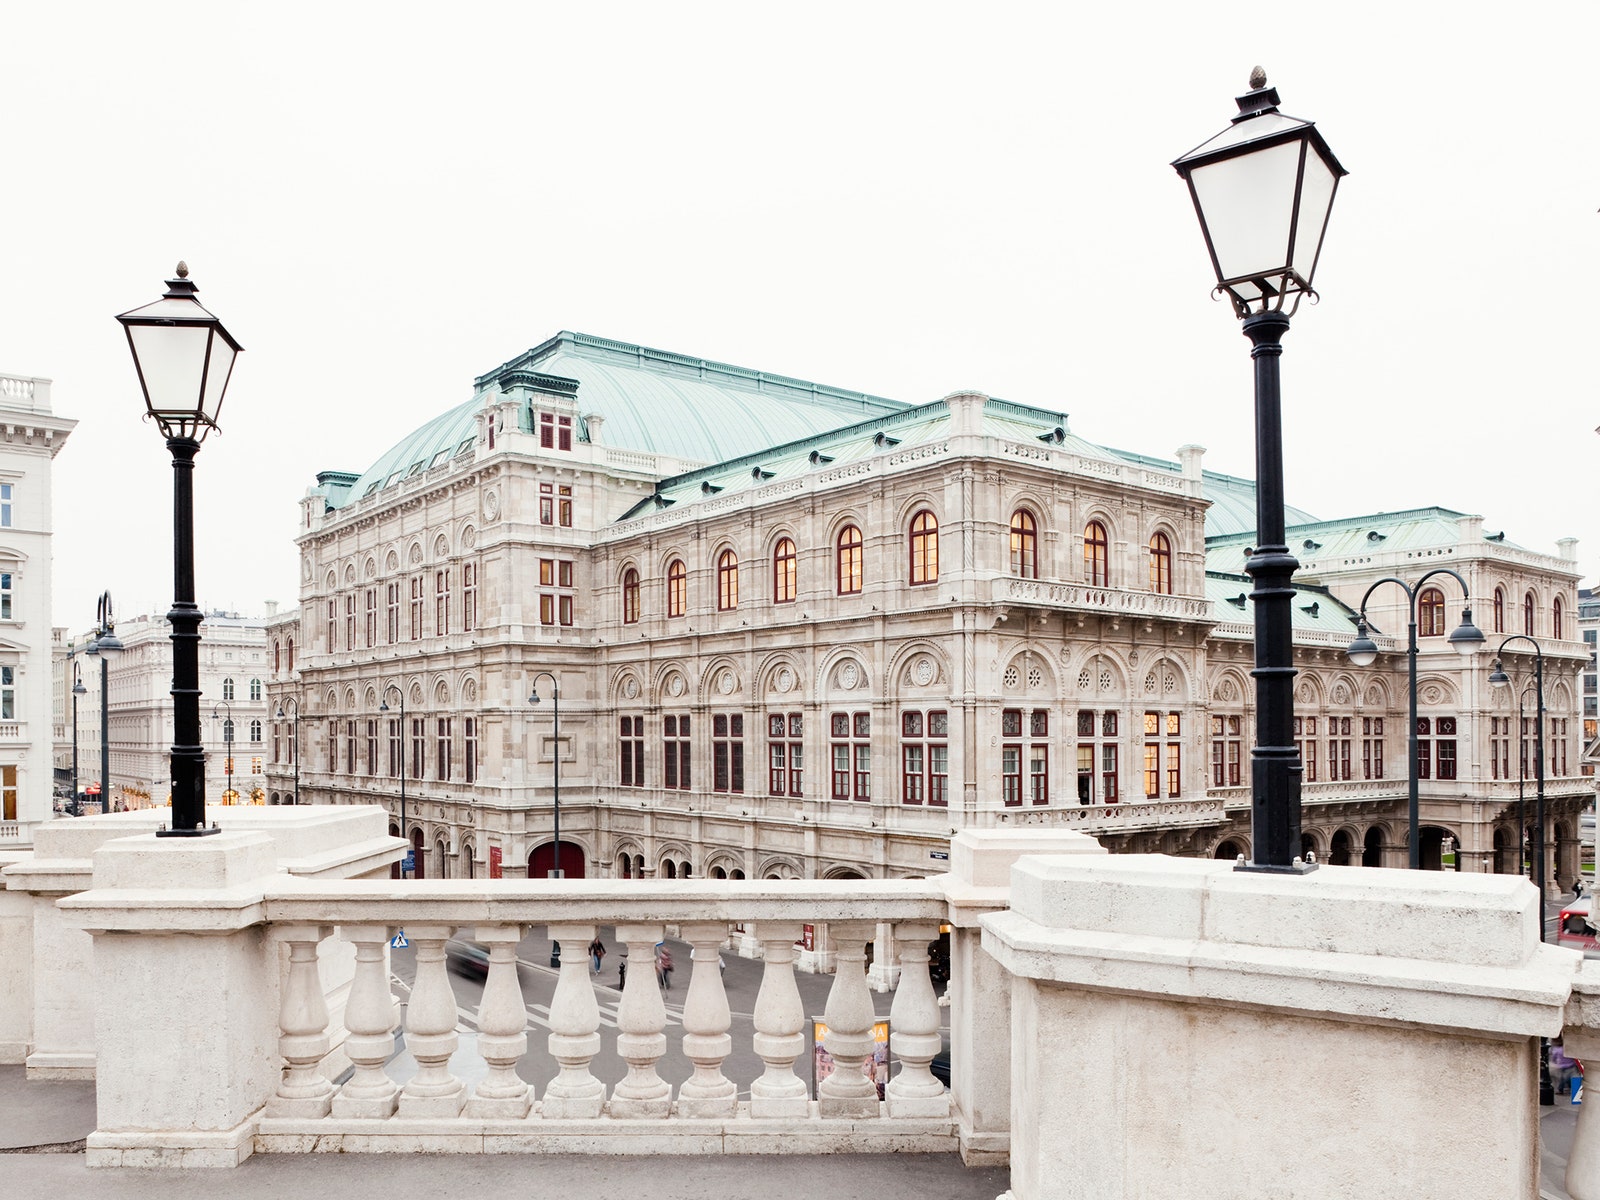 Here Are 22 Countries – I’ll Be Impressed If You Know at Least 11 Capitals Vienna, Austria